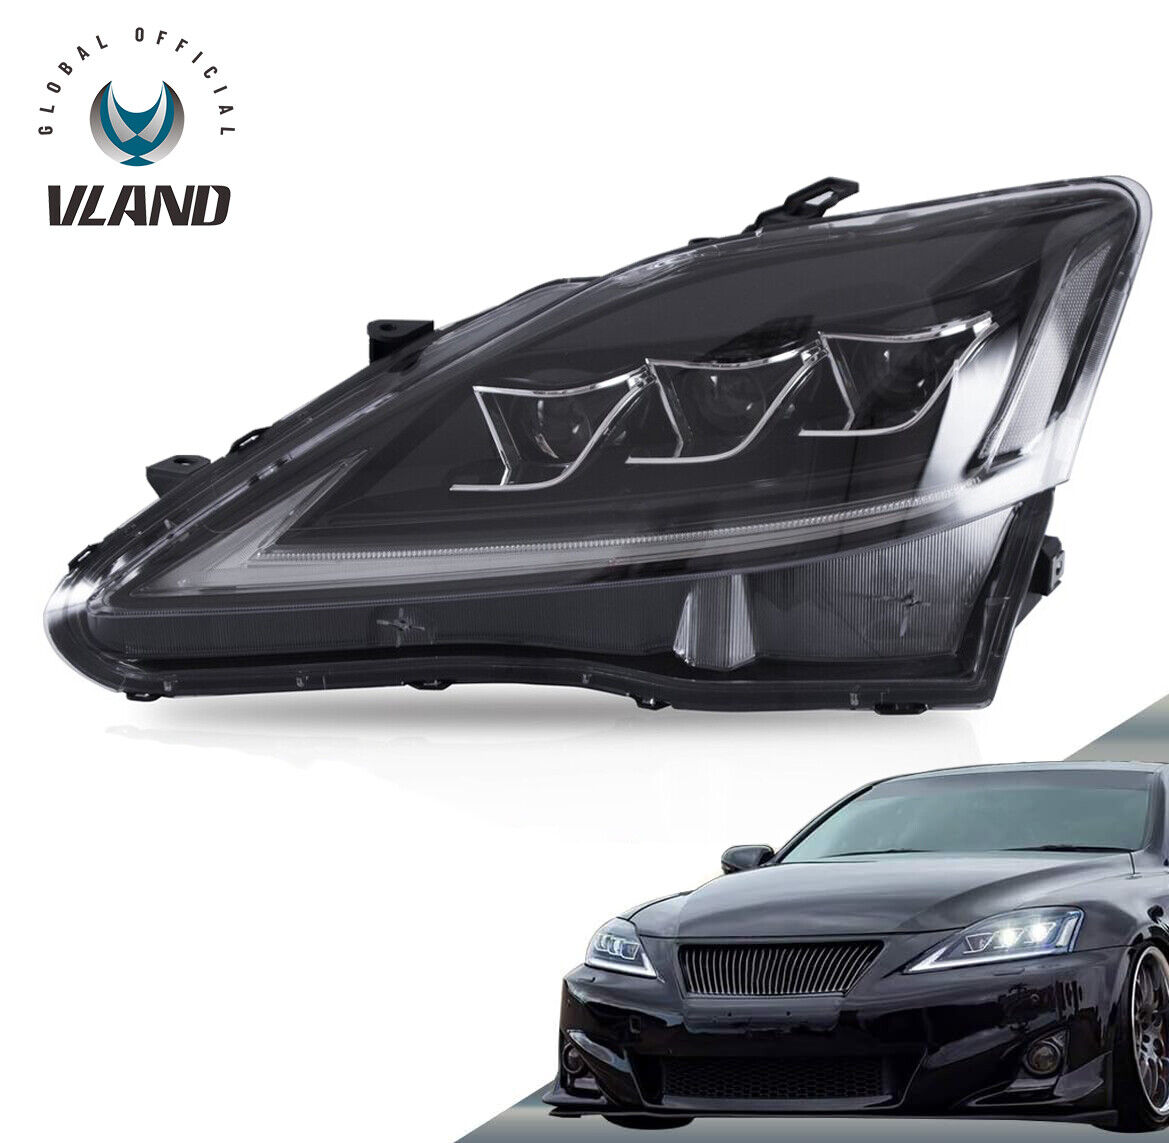 VLAND LED Headlight For Lexus IS250 IS350 IS F 2006-2013 Left Side Driver Light